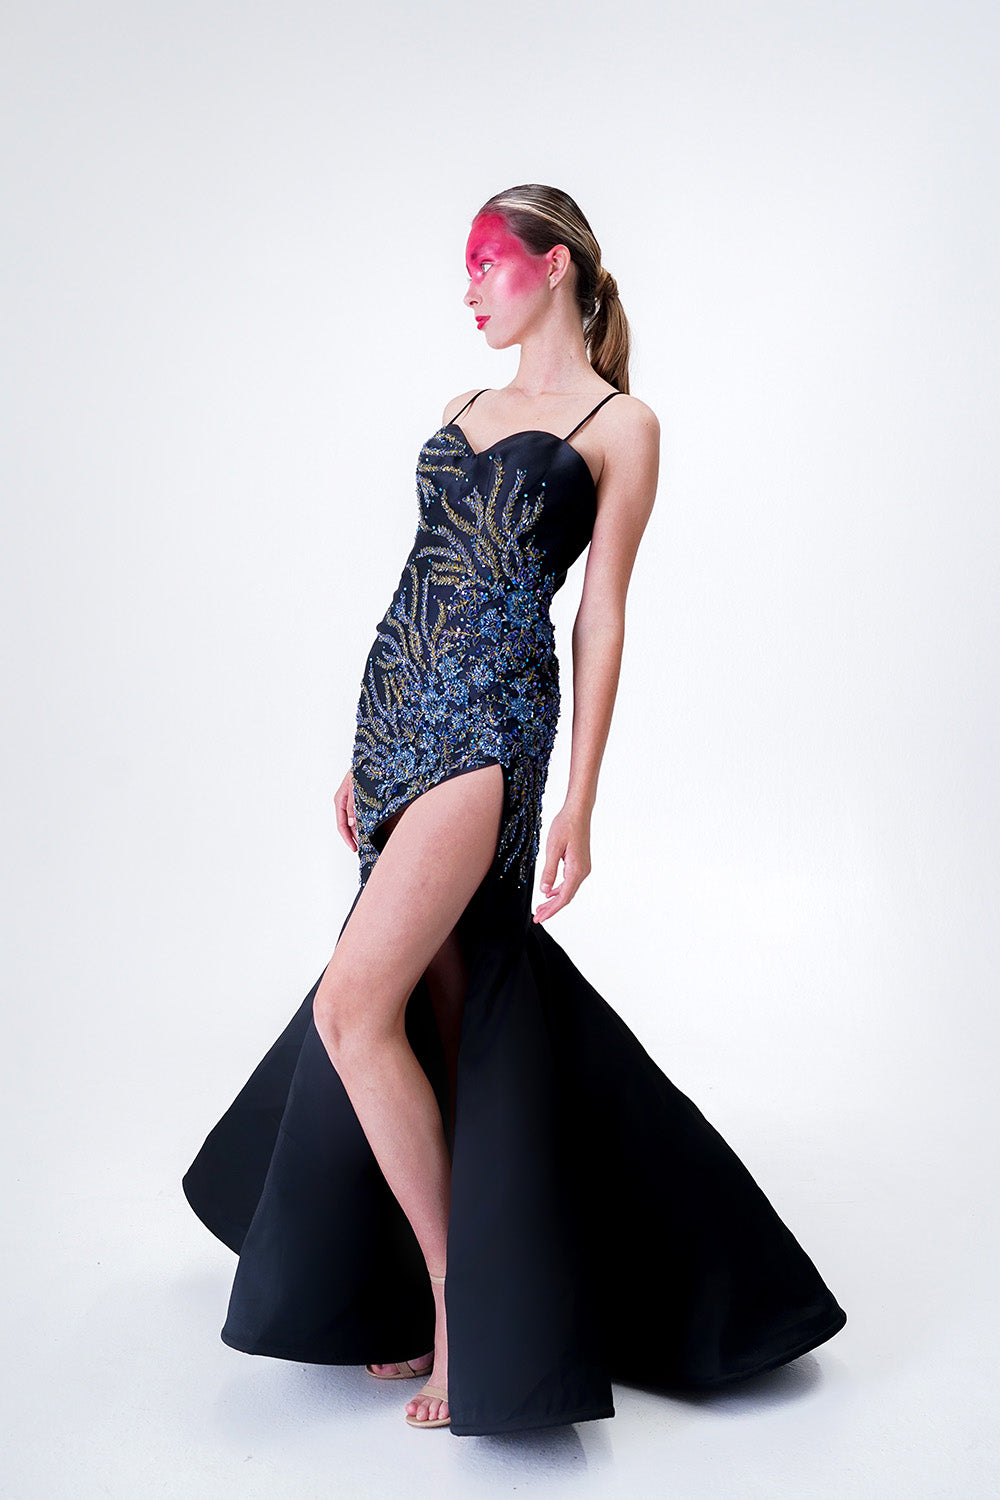 BLACK MERMAID GOWN WITH HIGH SLIT CUT OUT AND HAND BEADINGS DETAILS